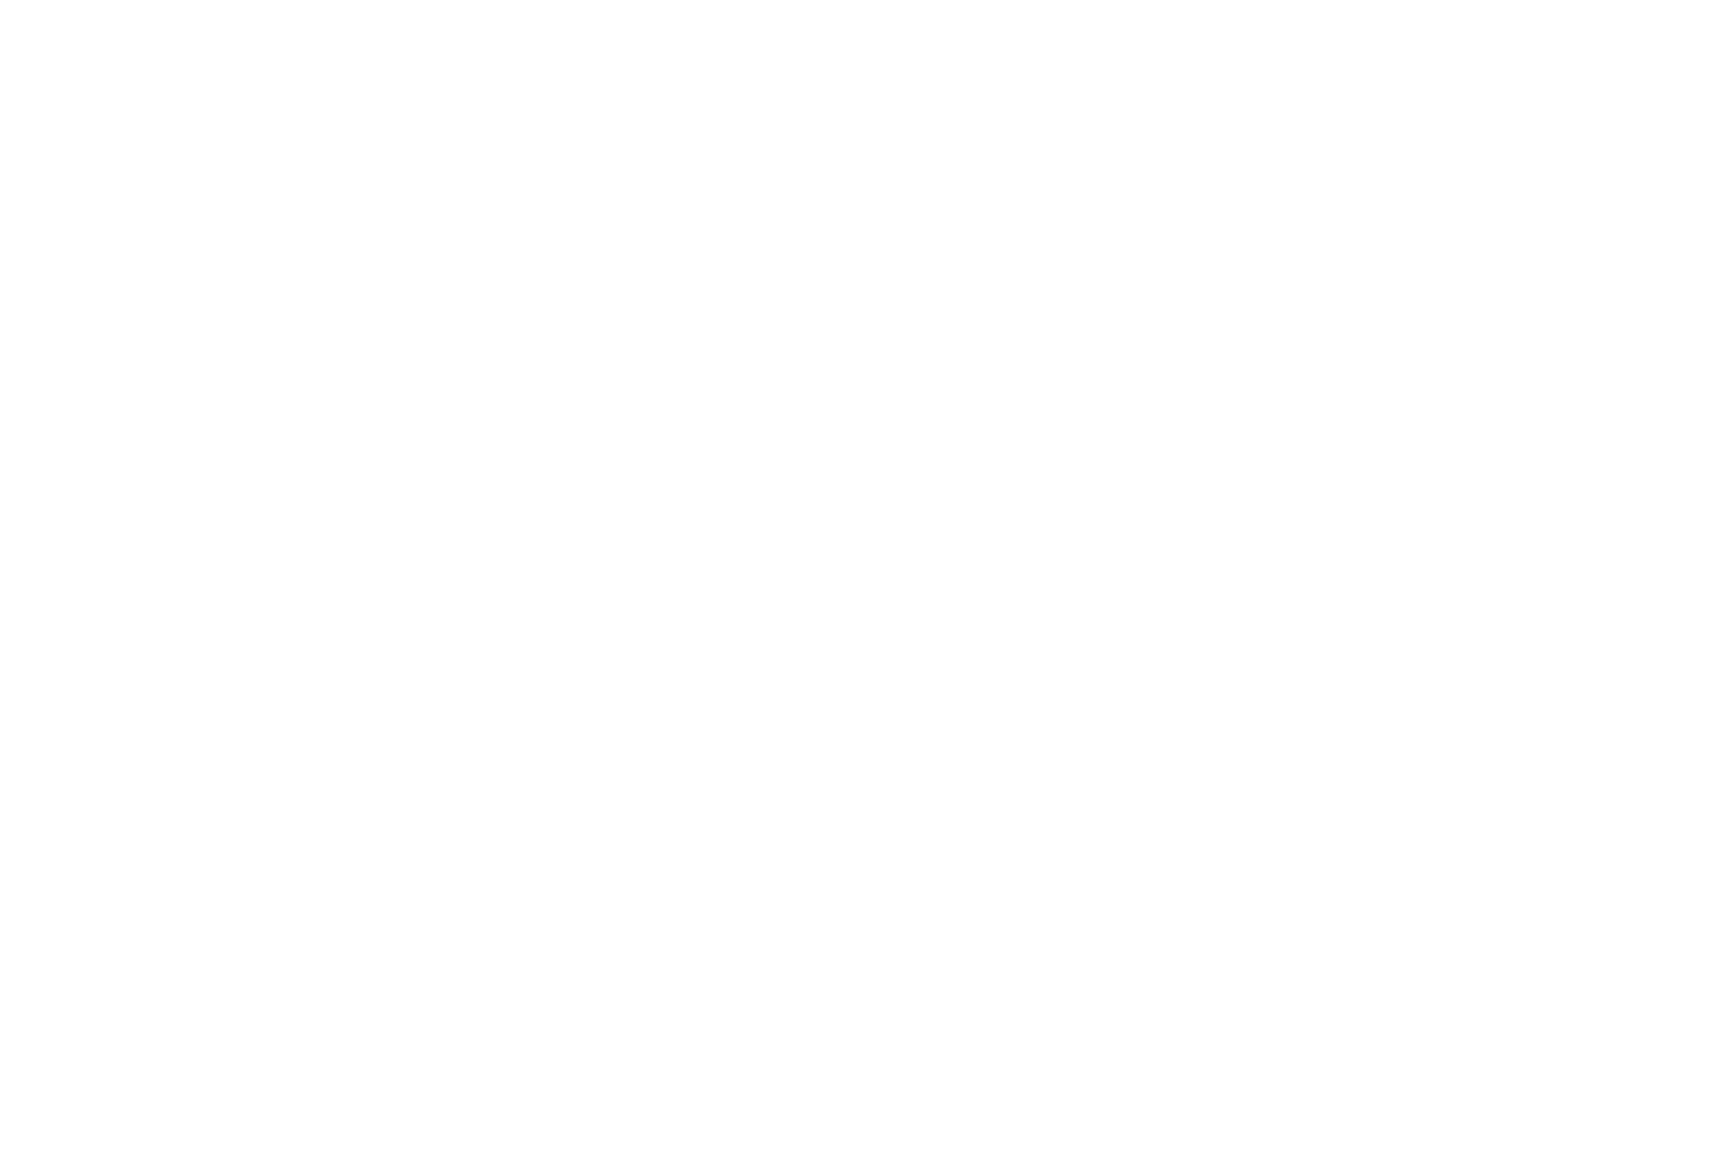 NOMINEE - Cannes World Film Festival - 2021.png